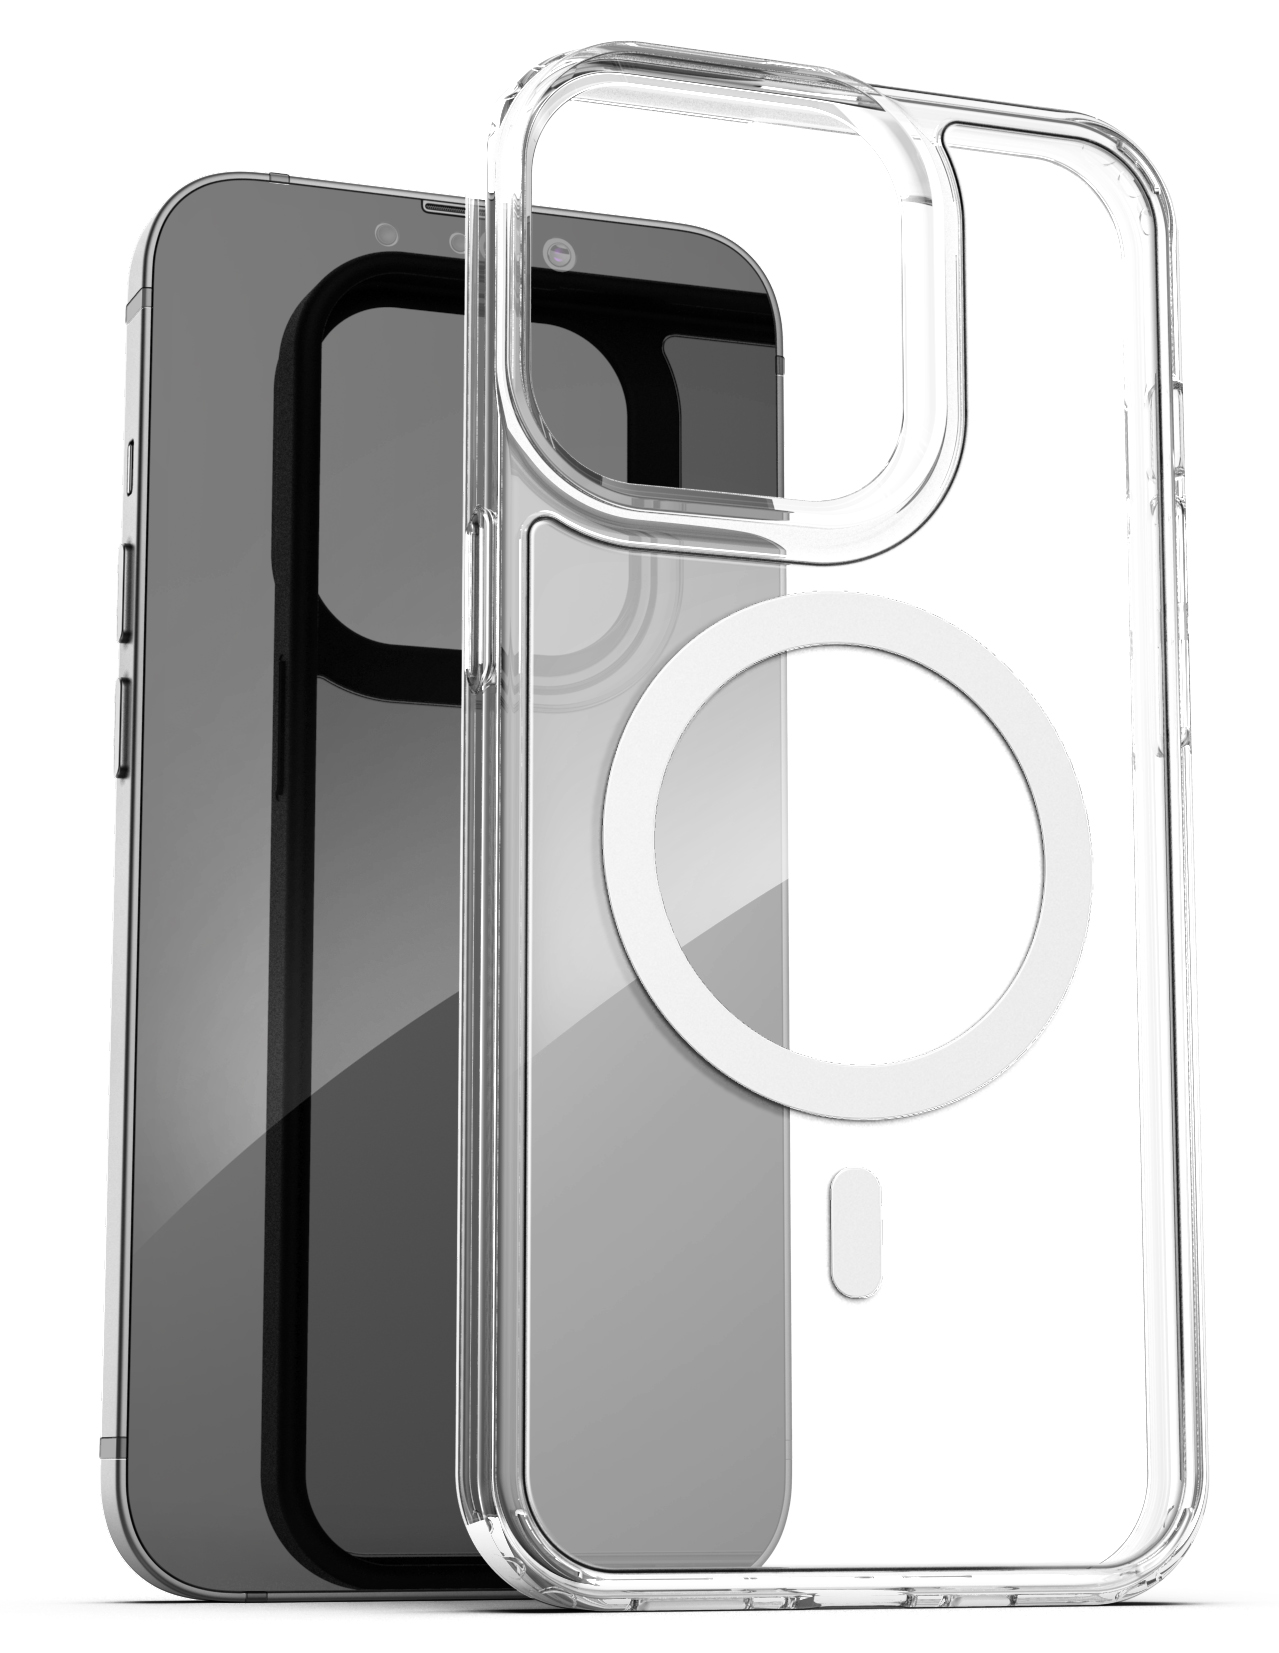 iPhone 13 Pro Cases » MagSafe Grip » dbrand